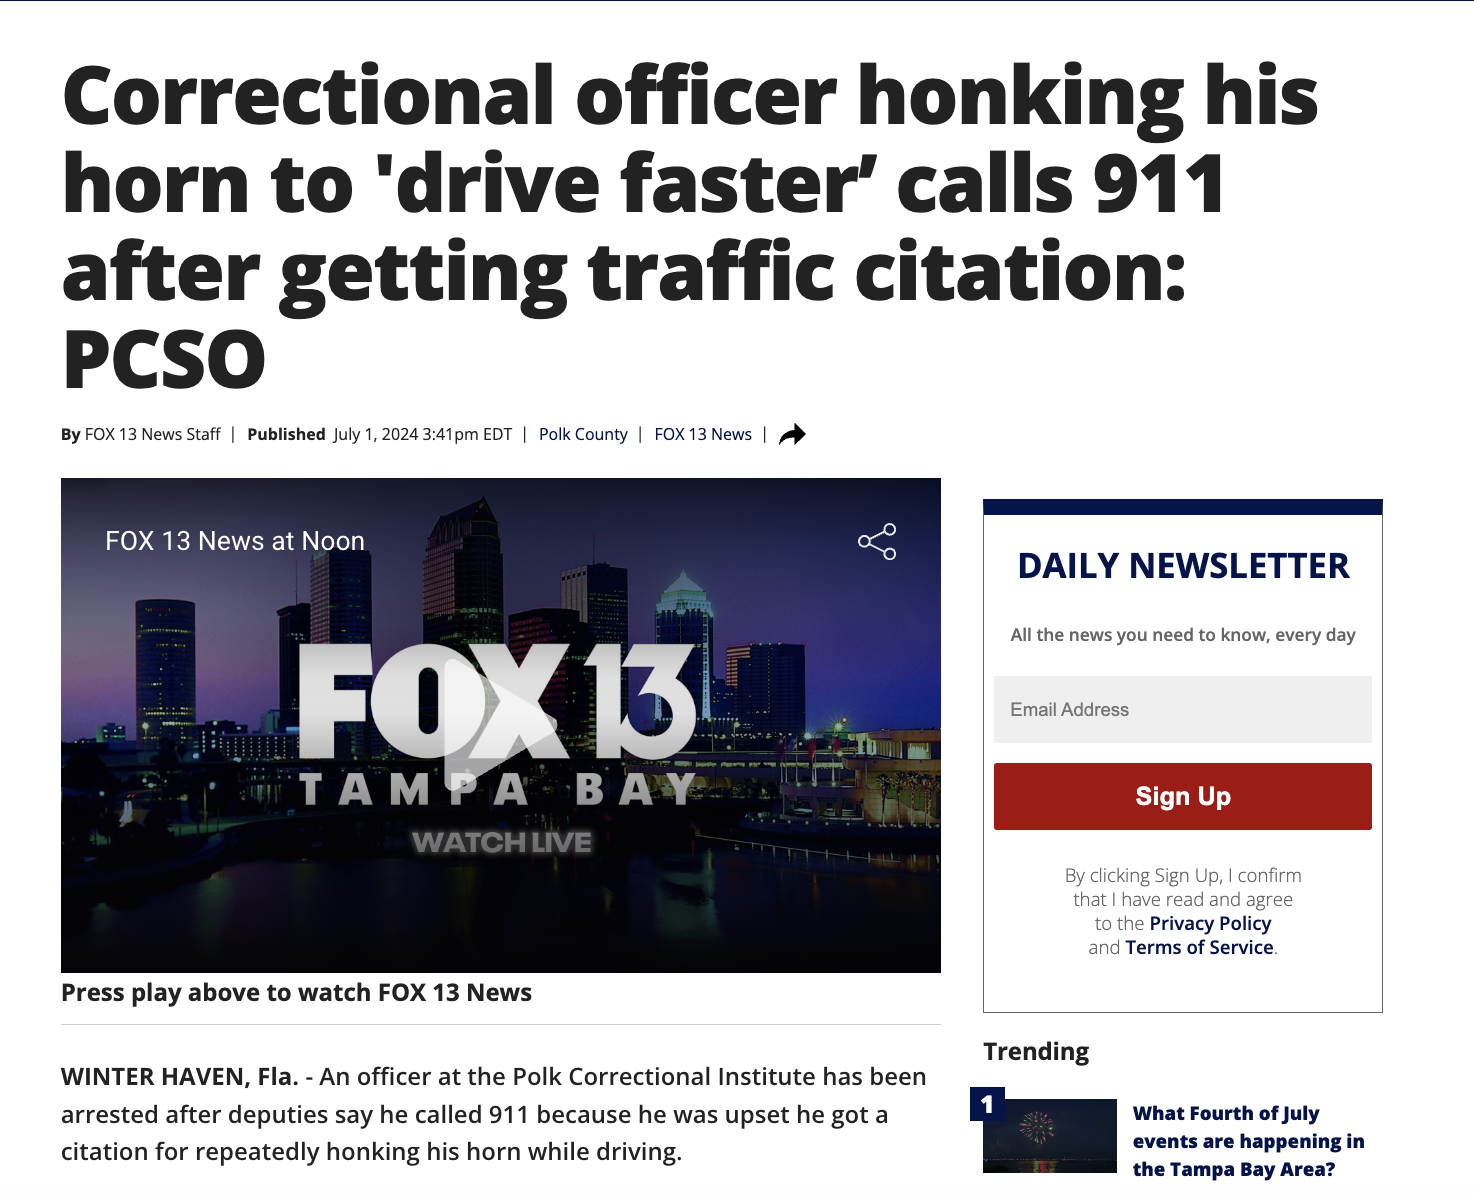 metropolis - Correctional officer honking his horn to 'drive faster' calls 911 after getting traffic citation Pcso By Fox 13 News Staff | Published pm Edt | Polk County | Fox 13 News | Fox 13 News at Noon Fox 13 Tampa Bay Watch Live go Daily Newsletter Al